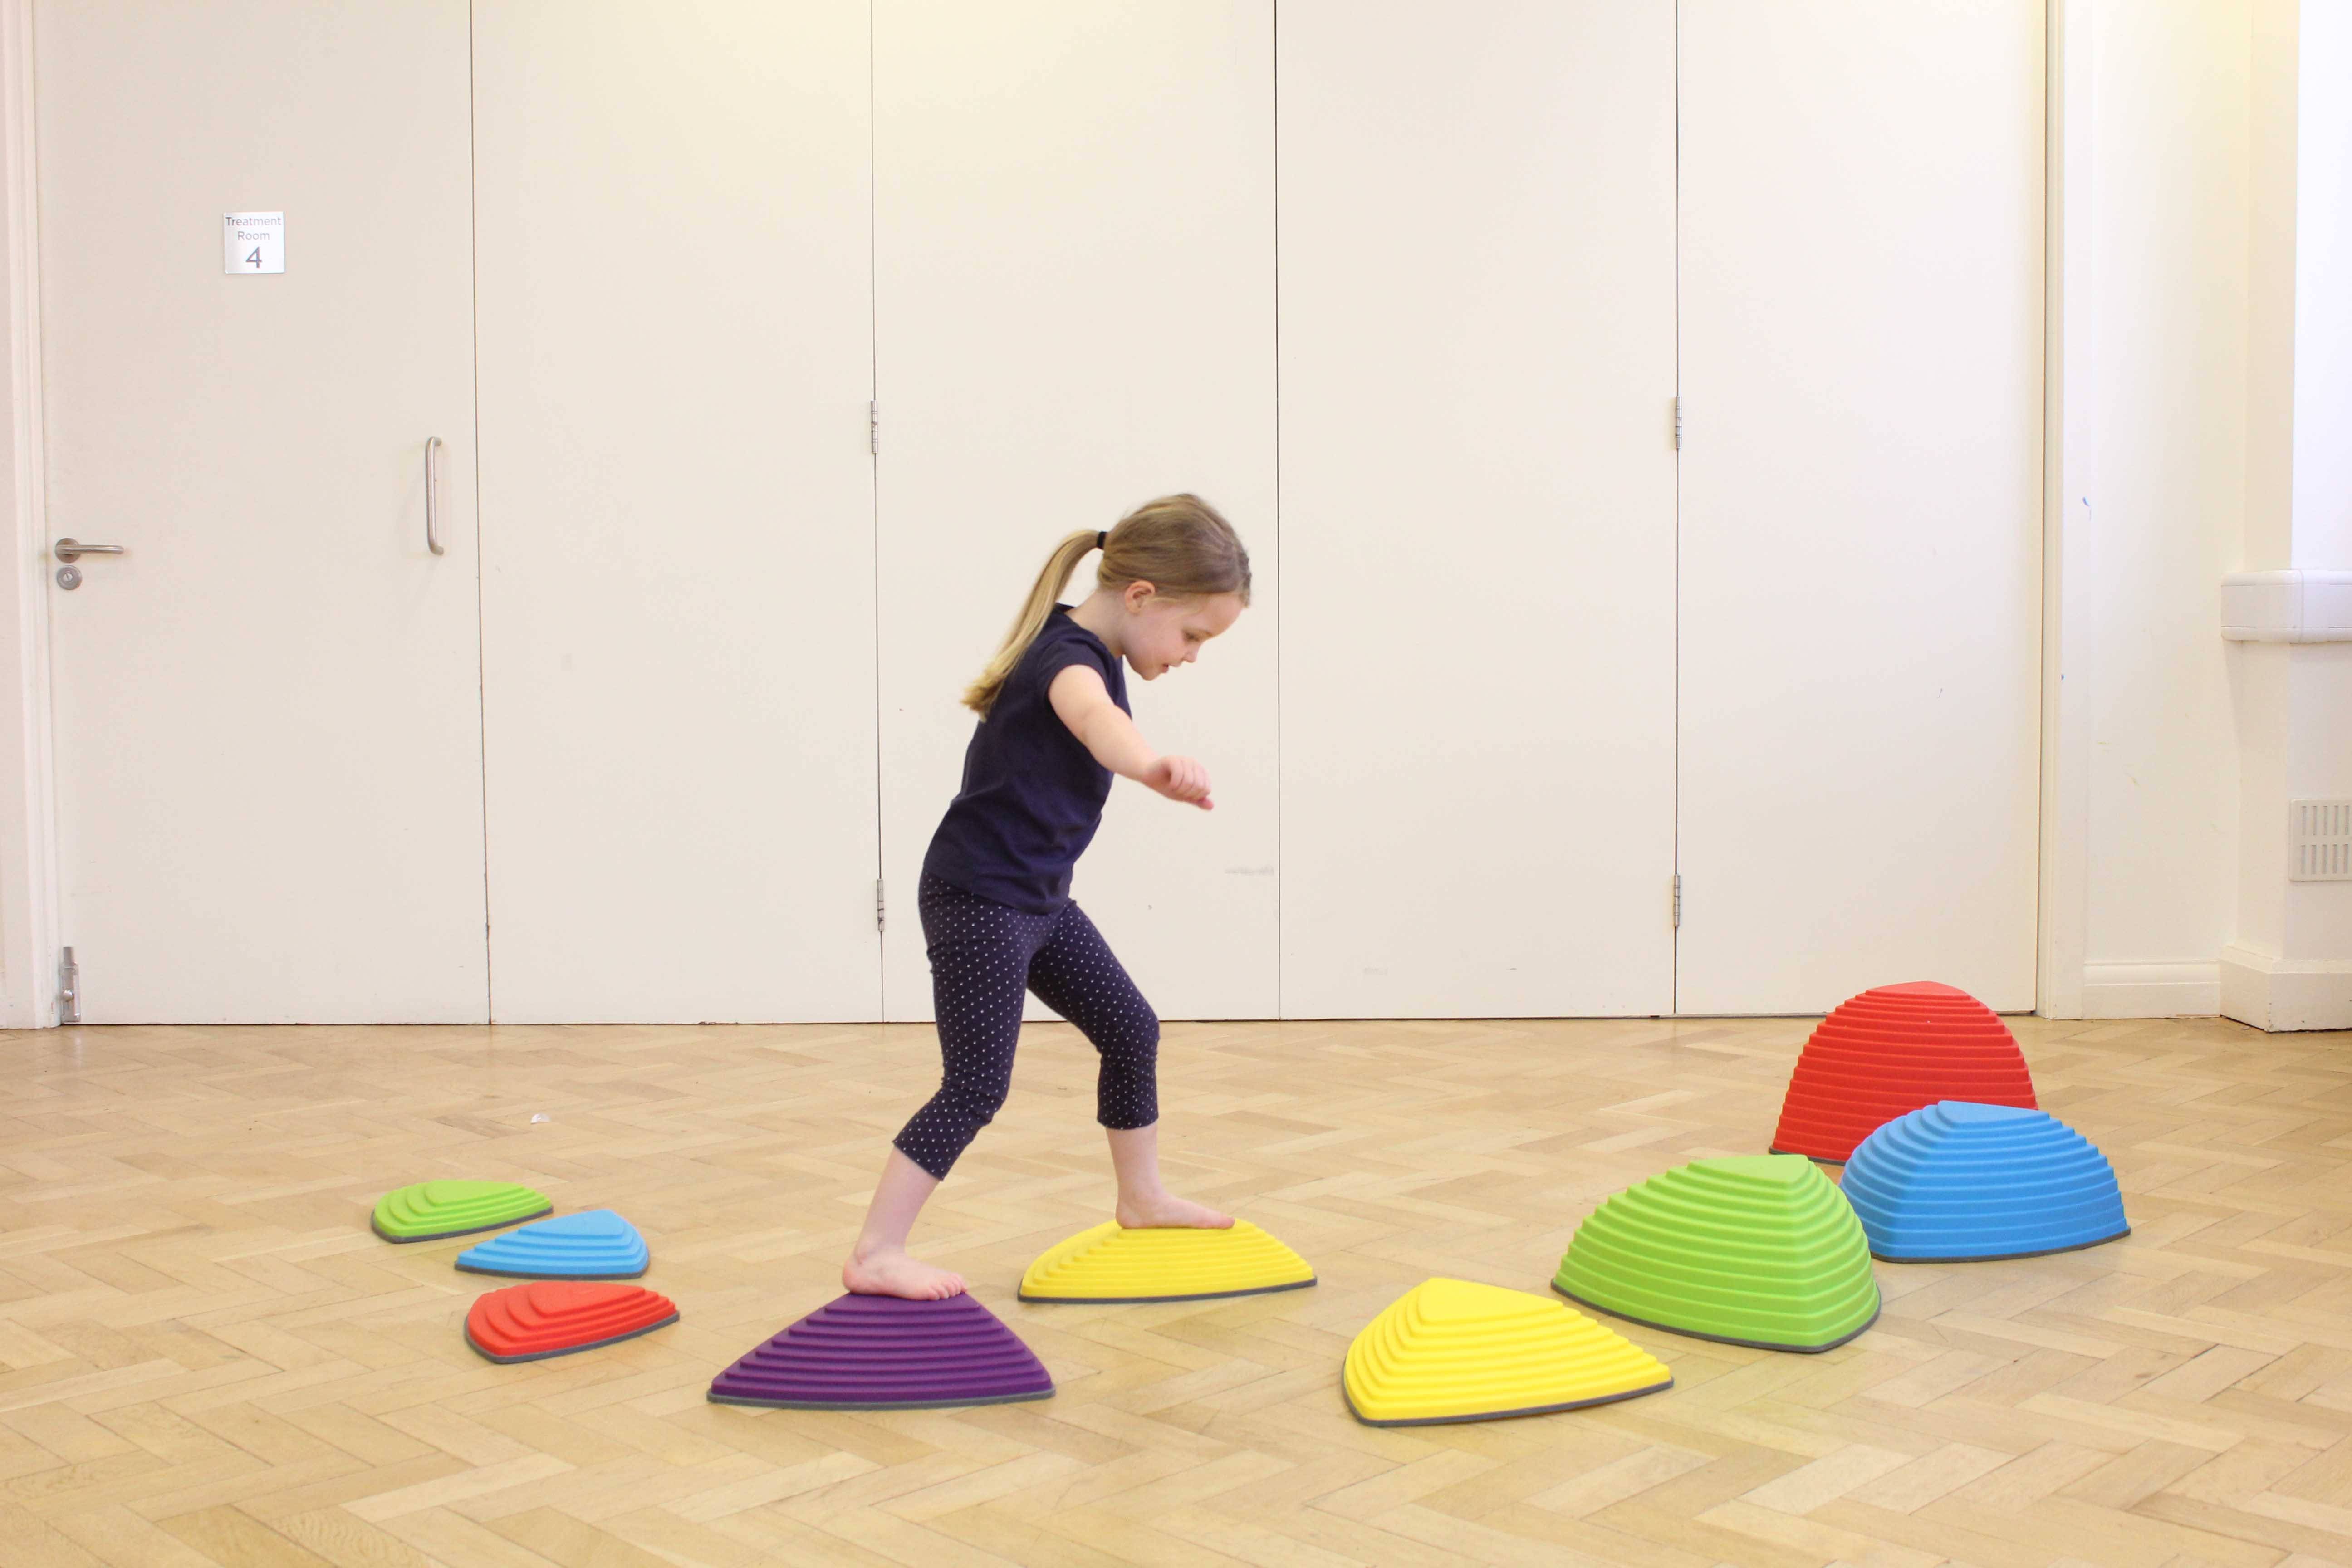 Stability and toning exercises supervised by a paediatric physiotherapist